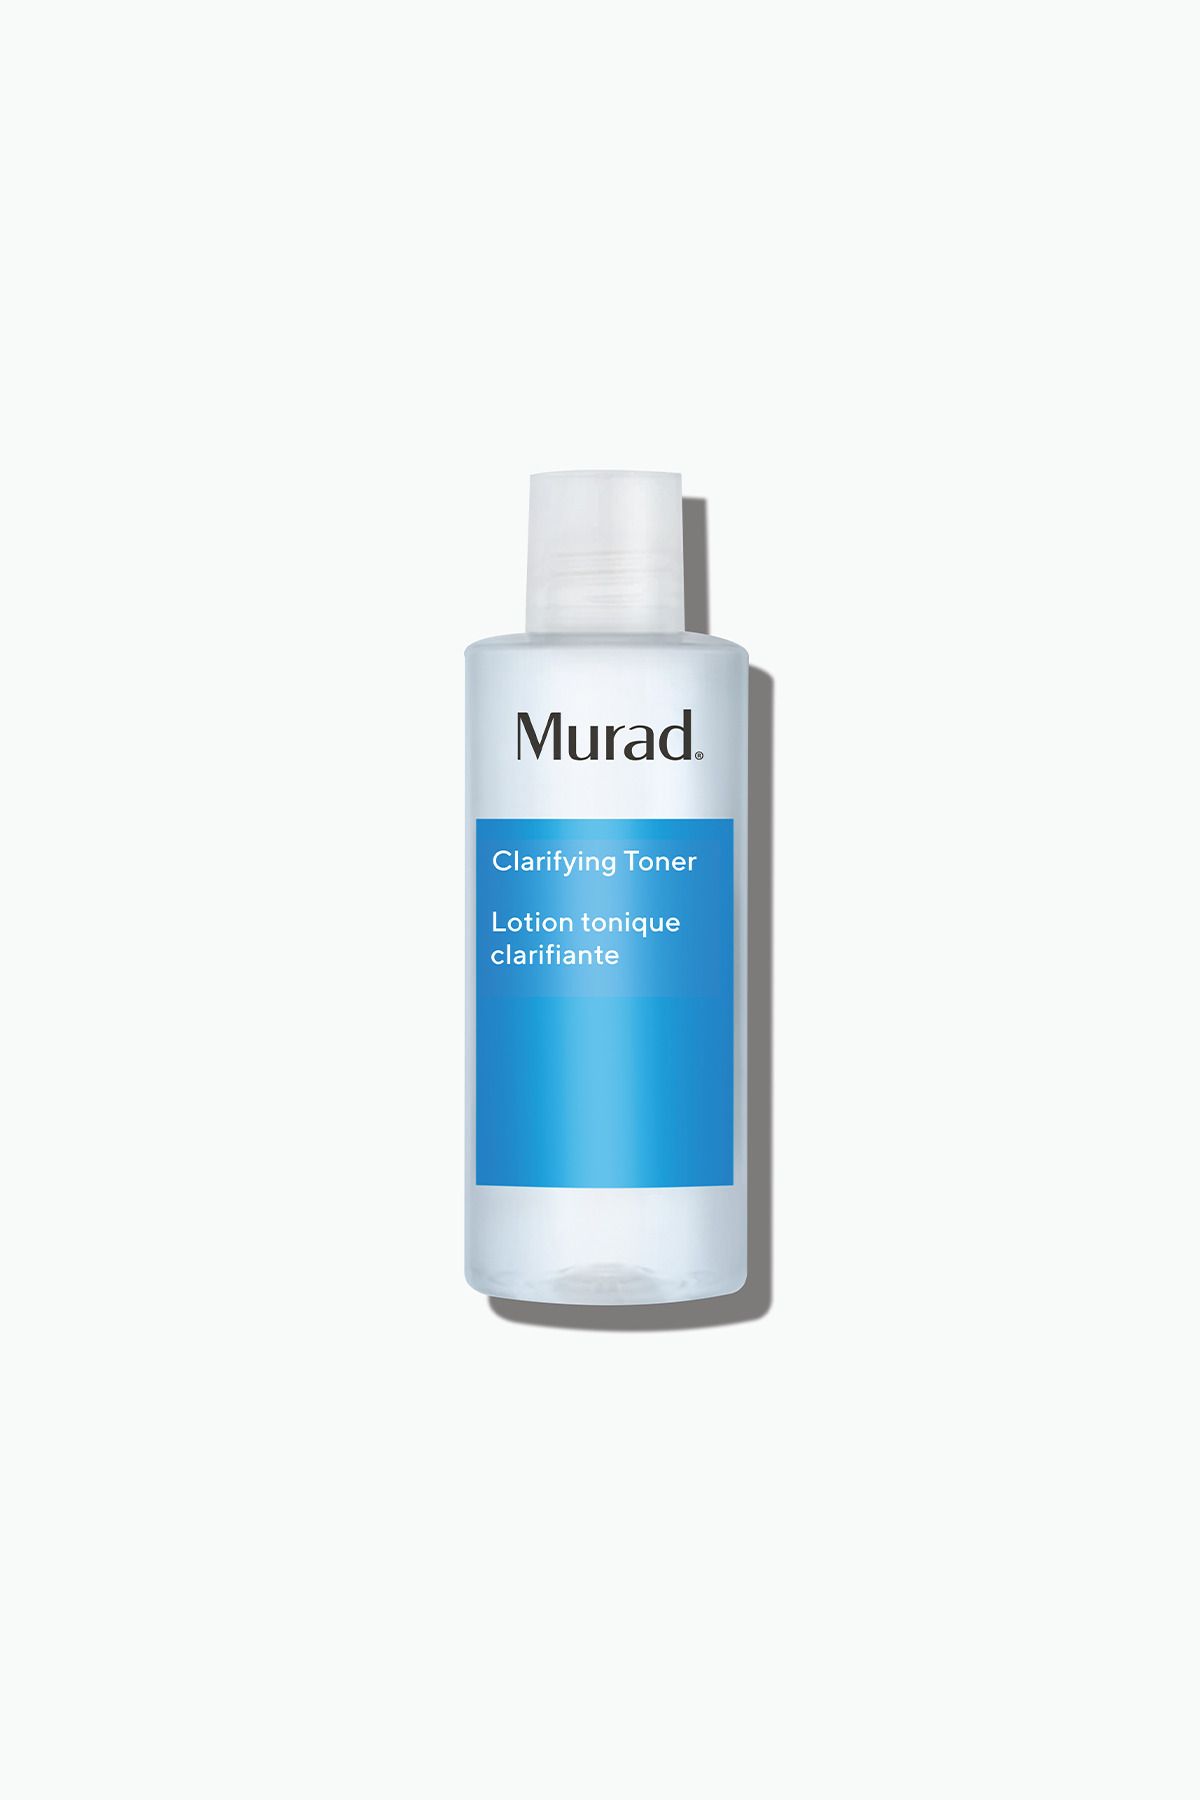 Murad CLARİFYİNG TONER – PURİFYİNG TONİC THAT DEEPLY CLEANS THE PORES 180 ML KEYON2086